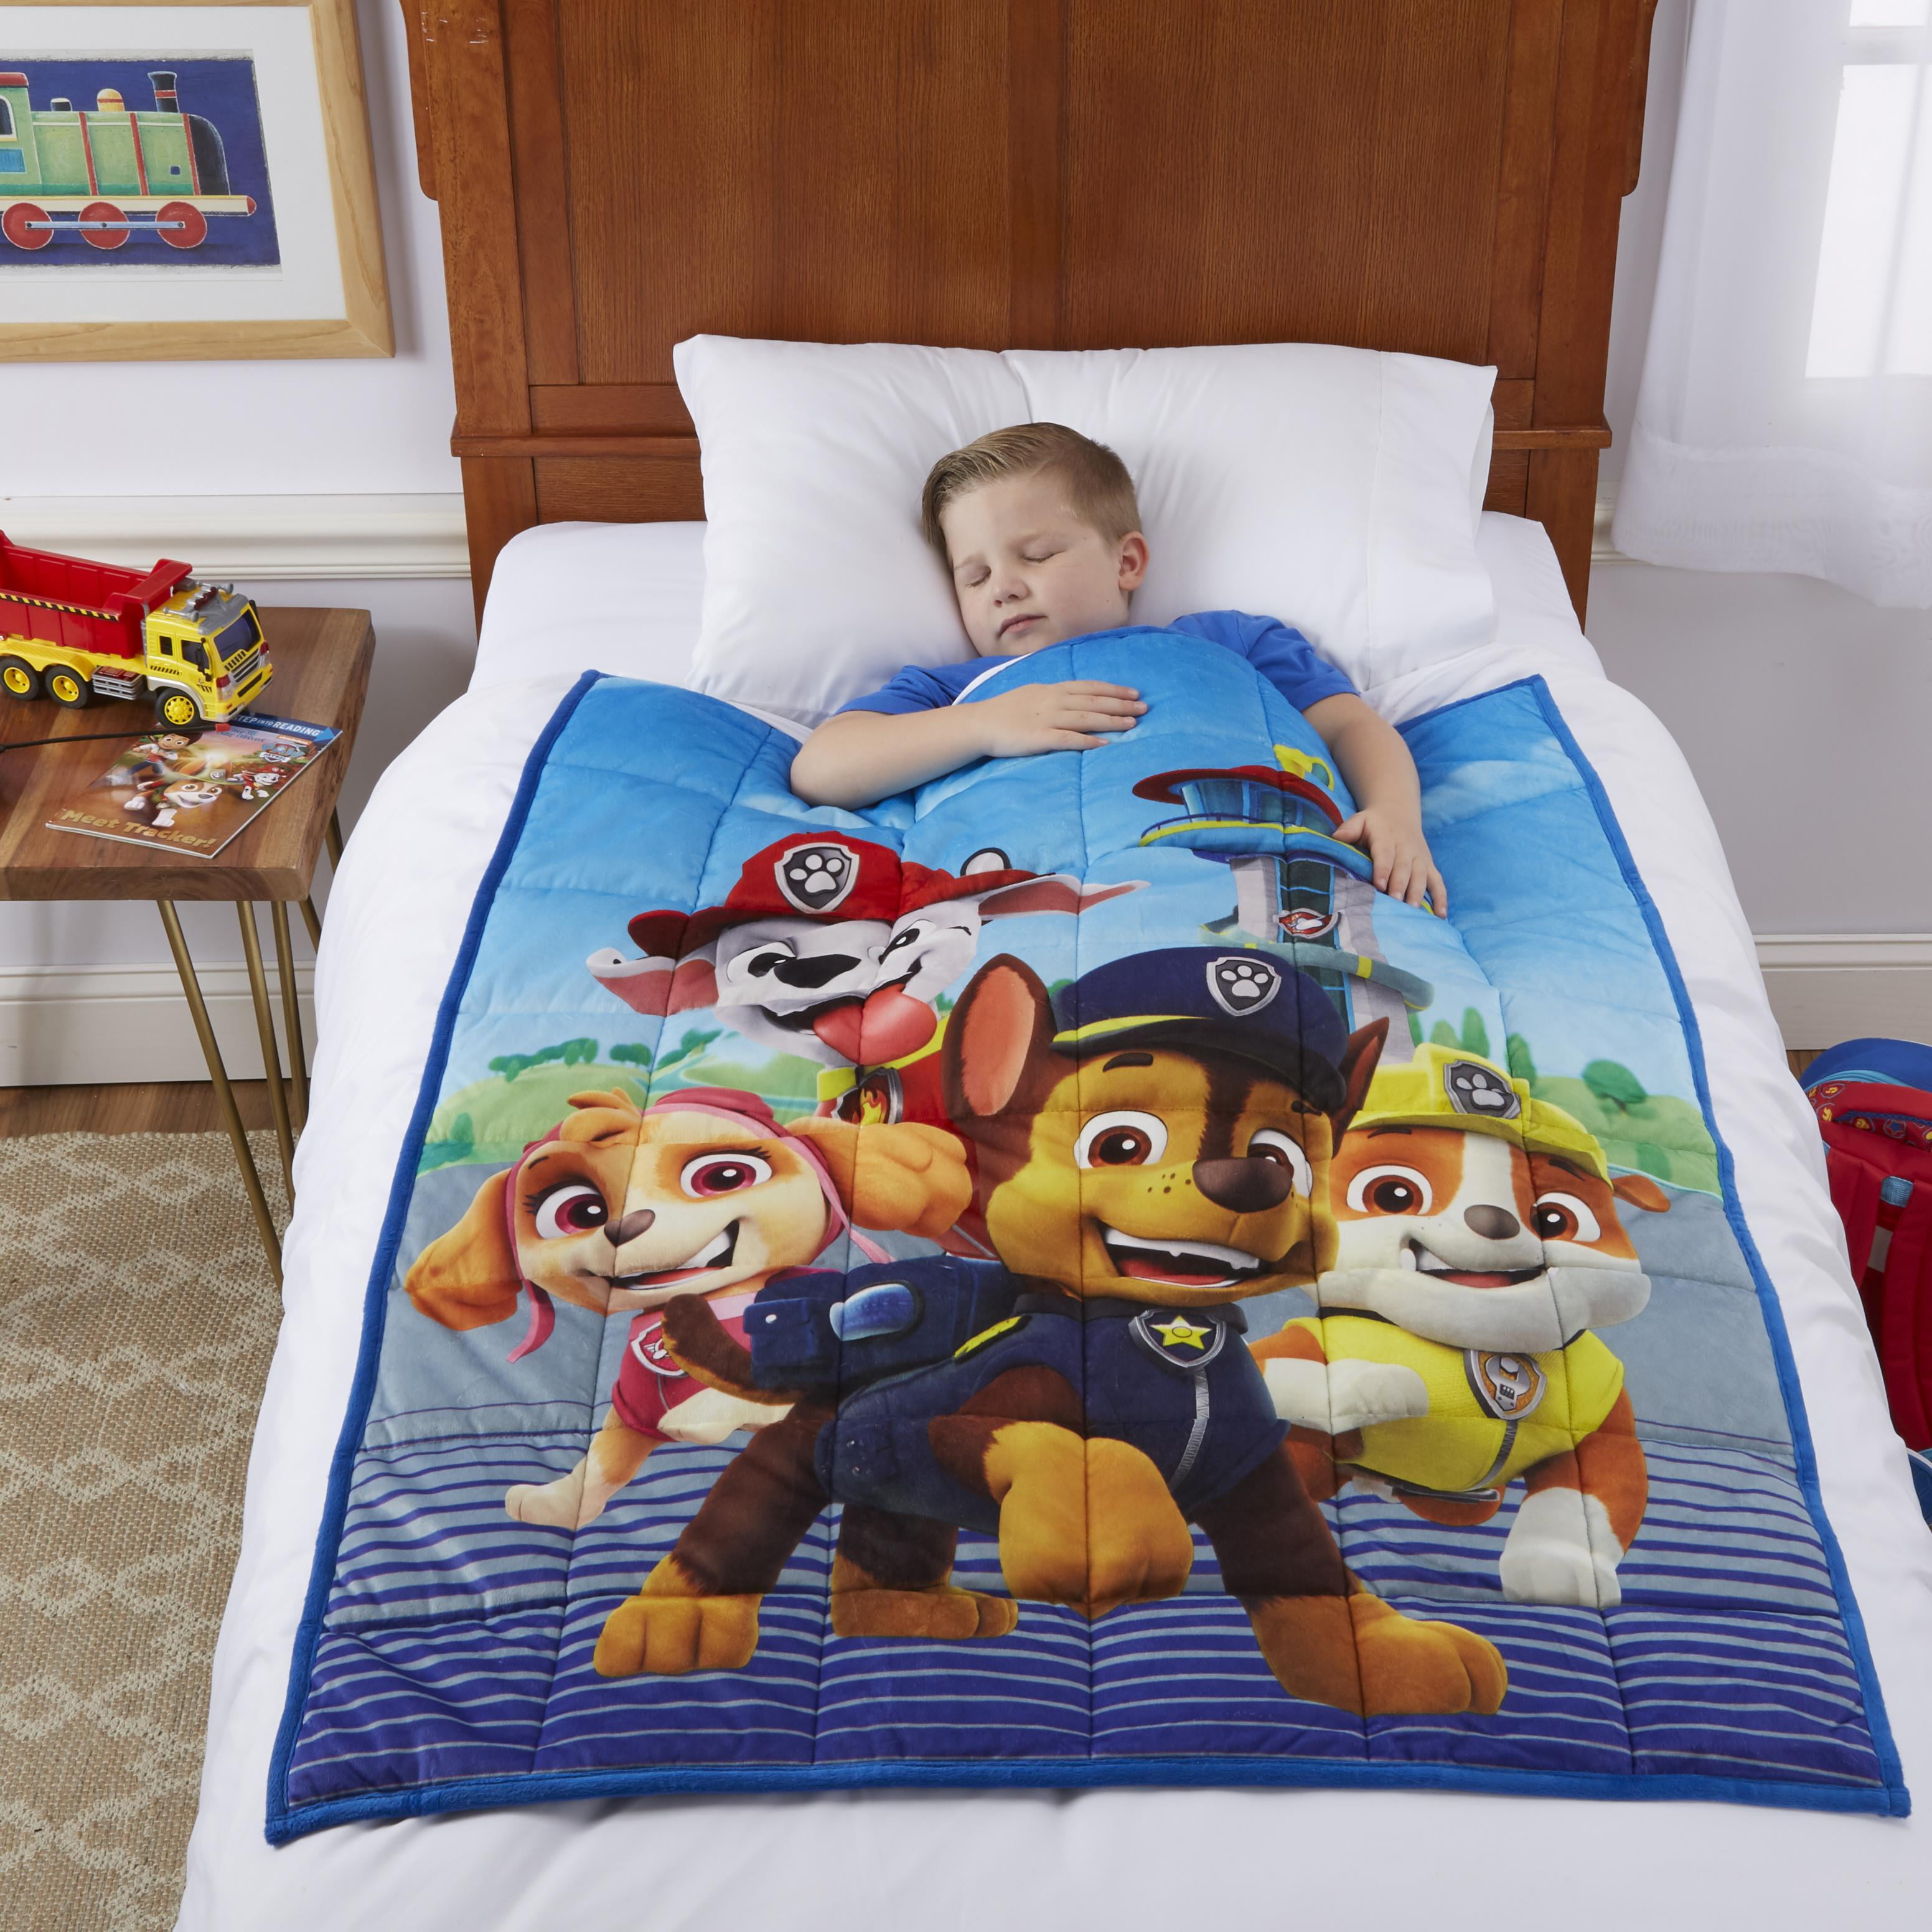 washable blanket ready to ship Weighted blanket 6 lbs kids Paw Patrol